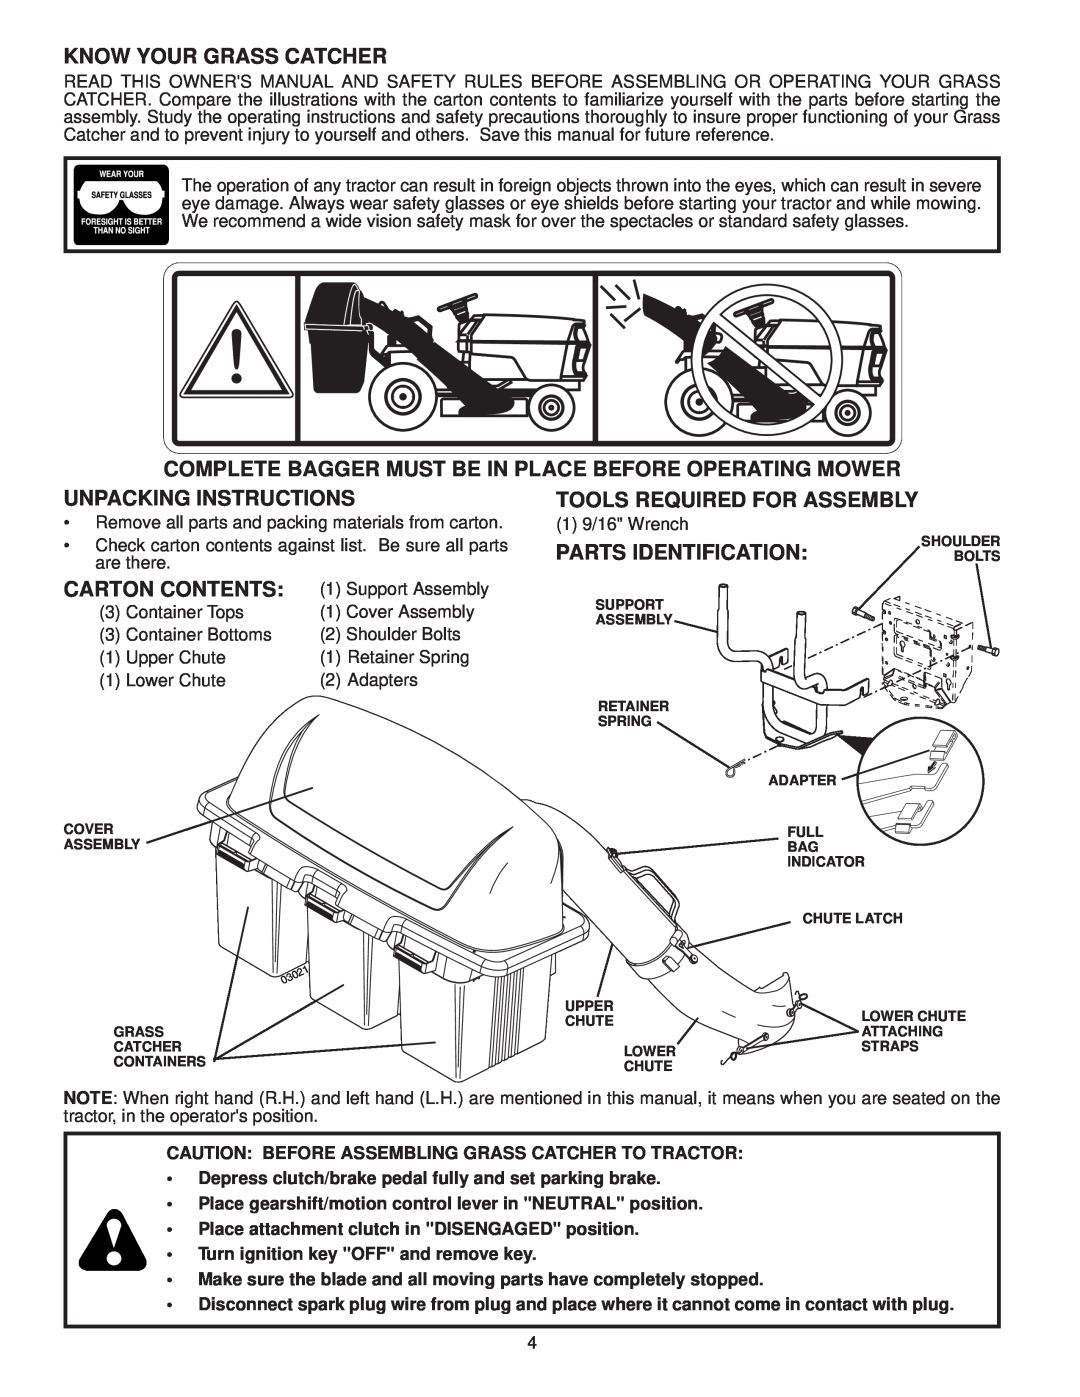 McCulloch 96071002300, H338HL Know Your Grass Catcher, Unpacking Instructions, Parts Identification, Carton Contents 